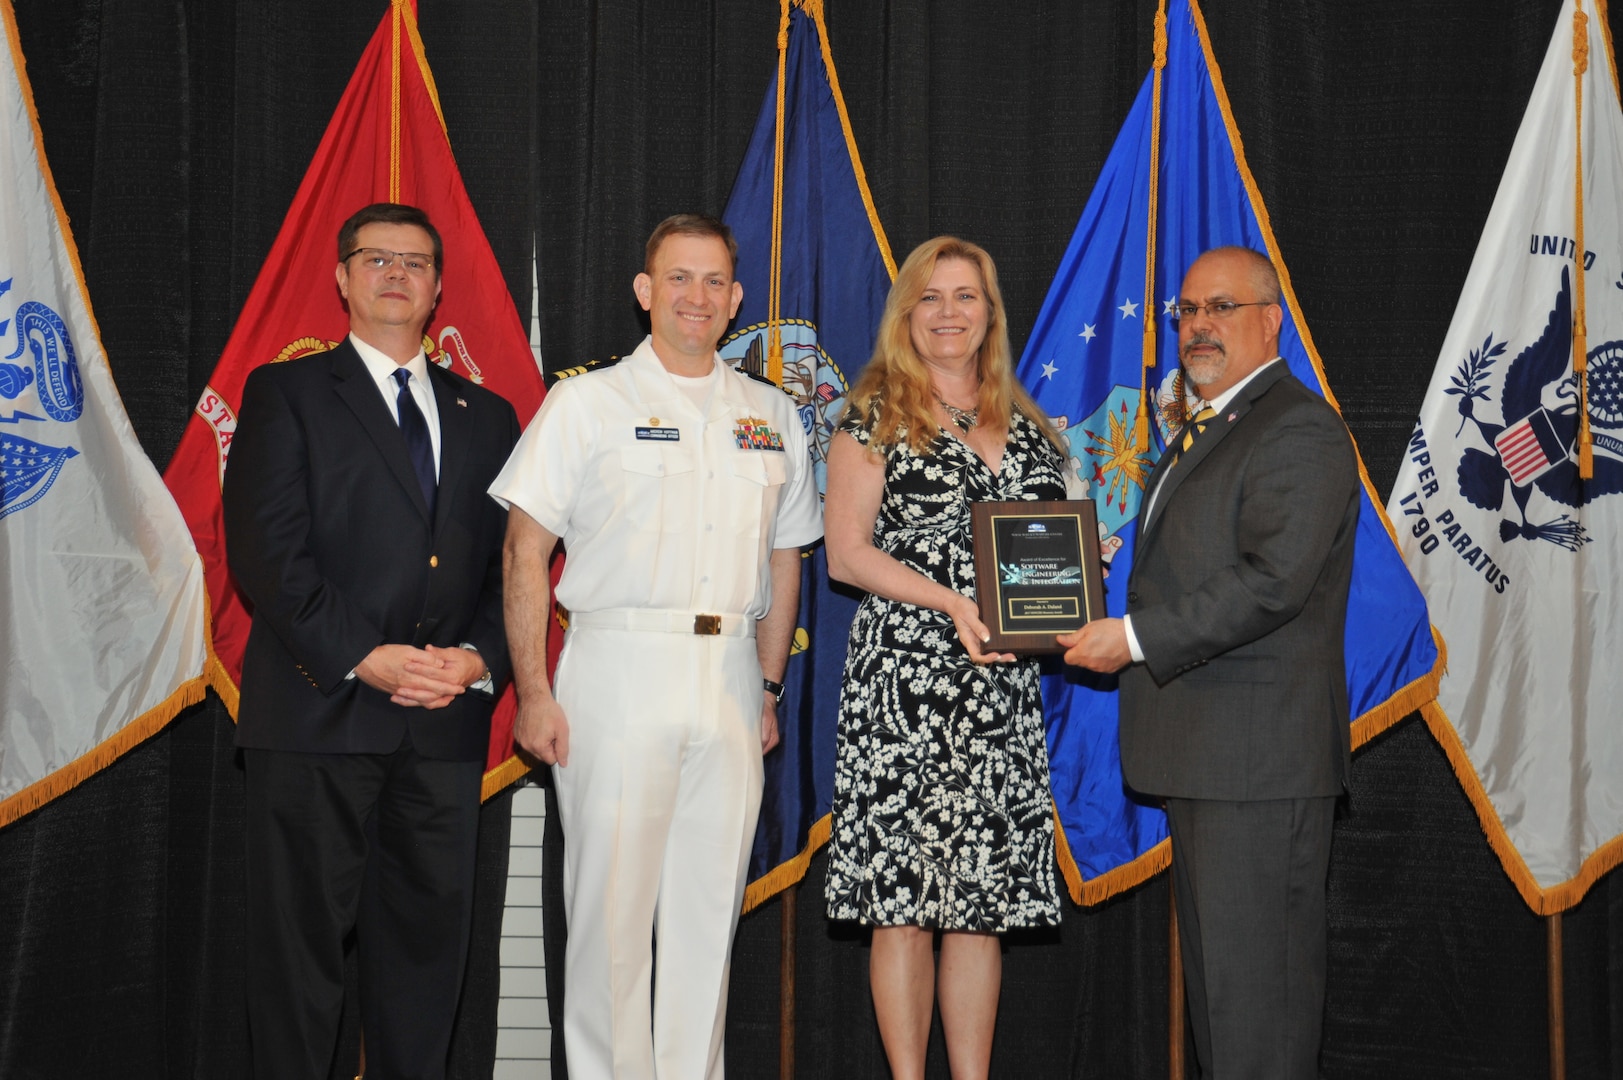 IMAGE: Deborah Daland is presented the  NSWCDD Award of Excellence for Software Engineering and Integration at Naval Surface Warfare Center Dahlgren Division's annual awards ceremony, Apr. 26 at the Fredericksburg Expo and Conference Center.

The NSWCDD Award of Excellence for Software Engineering and Integration was established to recognize individuals who have made a notable and significant impact to NSWCDD through their outstanding performance in Software Engineering & Integration.